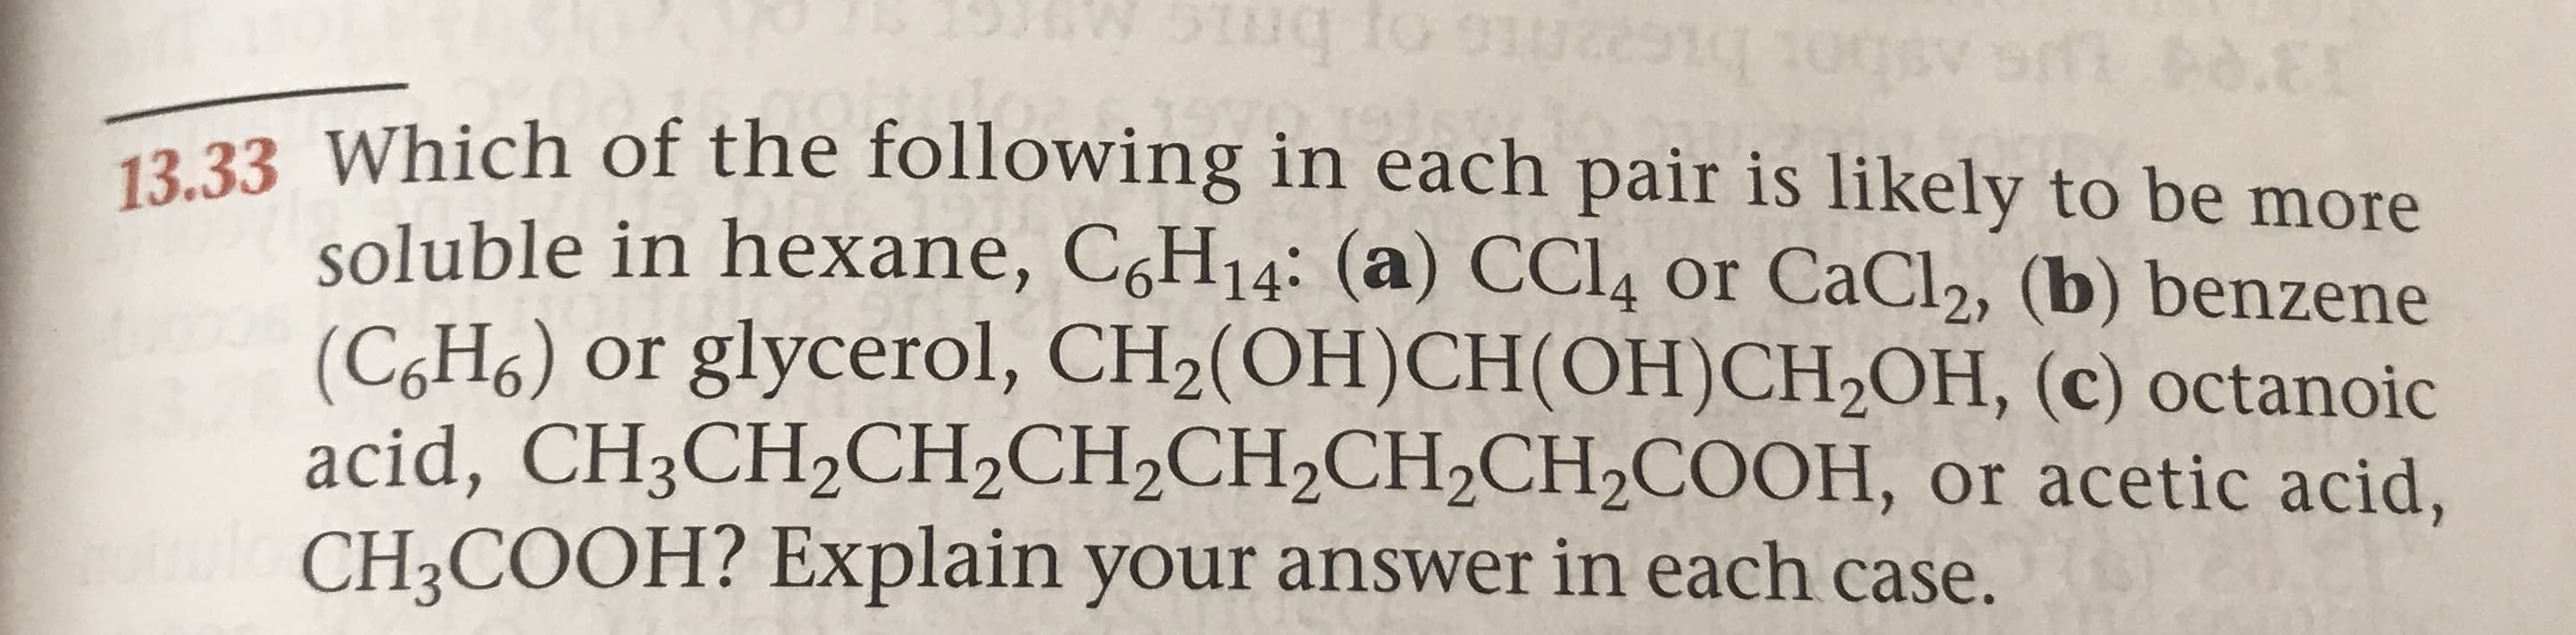 .EI
13.33 Which of the following in each pair is likely to be more
soluble in hexane, C6H14: (a) CCI4 or CaCl2, (b) benzene
(CH6) or glycerol, CH2(OH)CH (OH)CH2OH, (c) octanoic
acid, CH3CH2CH2CH2CH2CH2CH2COOH, or acetic acid,
CH3COOH? Explain your answer in each case.
